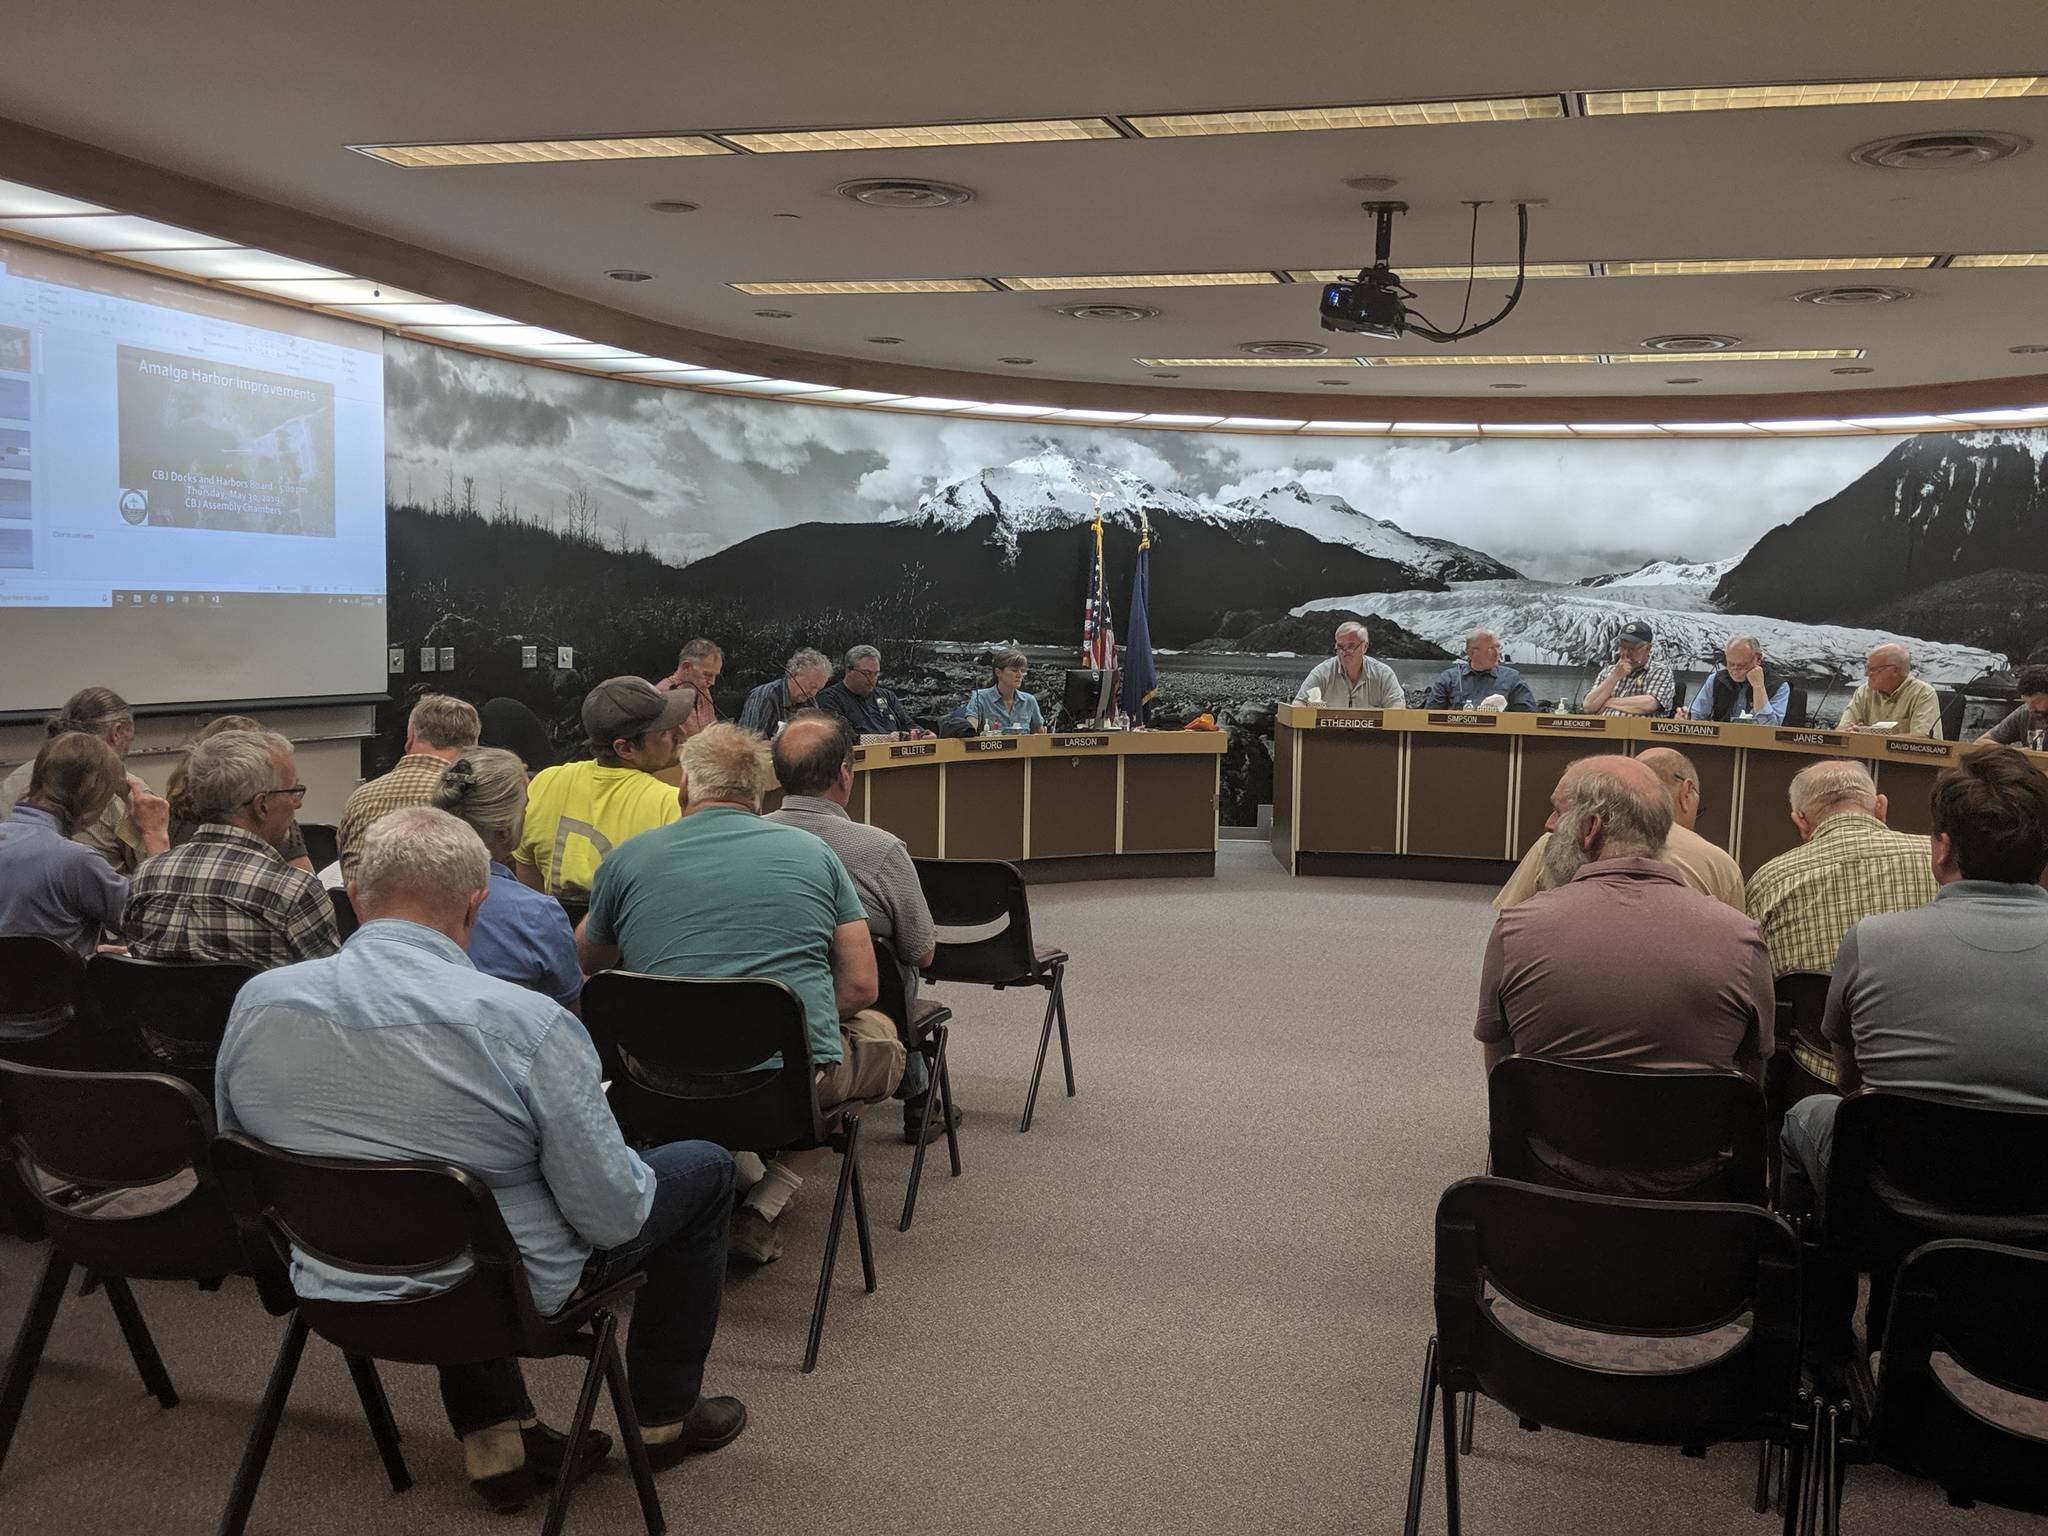 It wasn’t quite a full house, but there were about two dozen people in attendance at Thursday’s City and Borough of Juneau Docks & Harbors Board meeting. (Ben Hohenstatt | Juneau Empire)